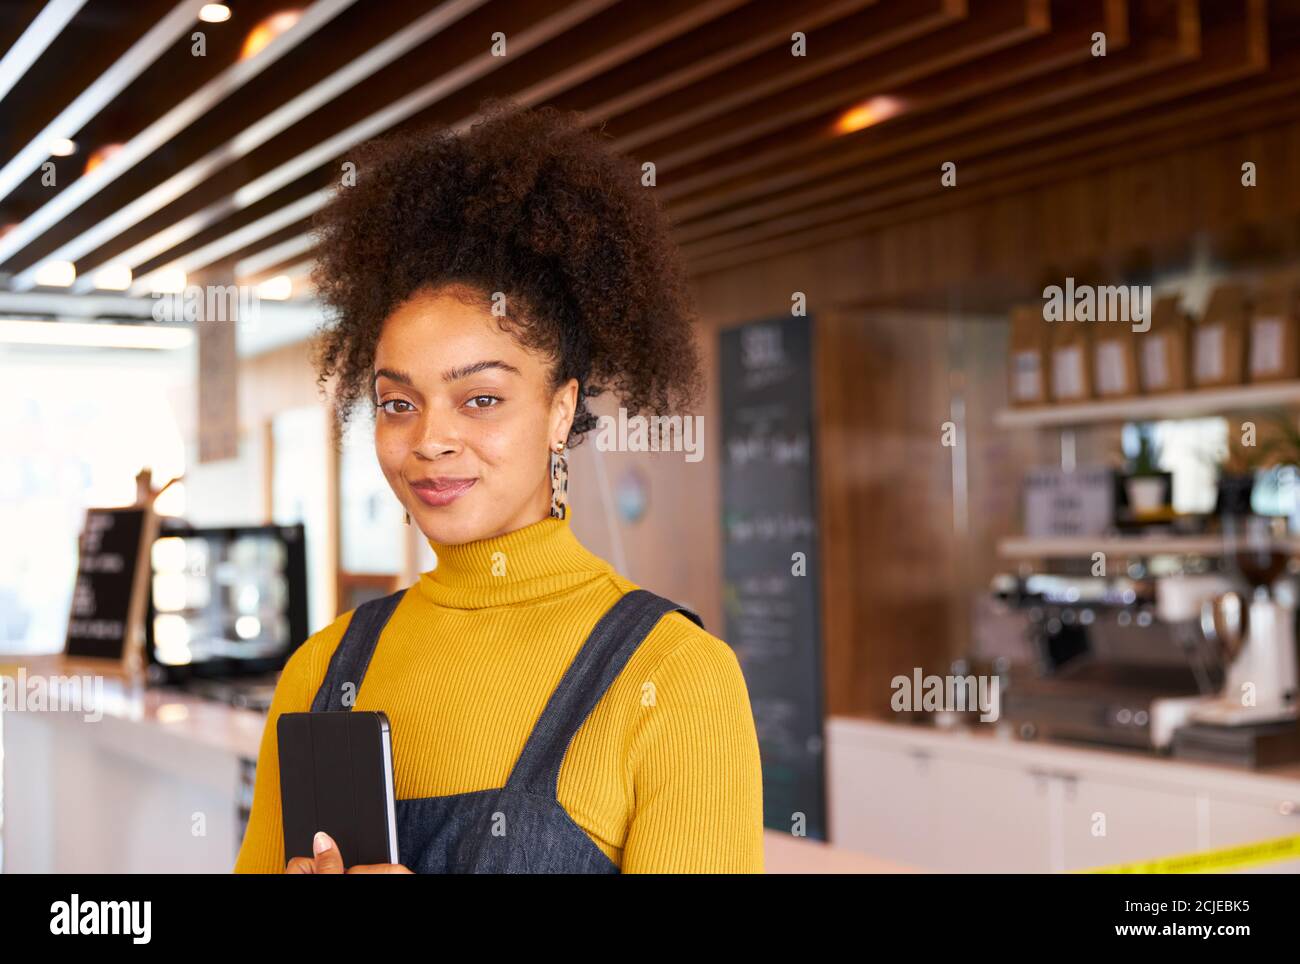 Portrait Of Female Business Owner Of Coffee Shop In Mask Using Digital Tablet During Health Pandemic Stock Photo